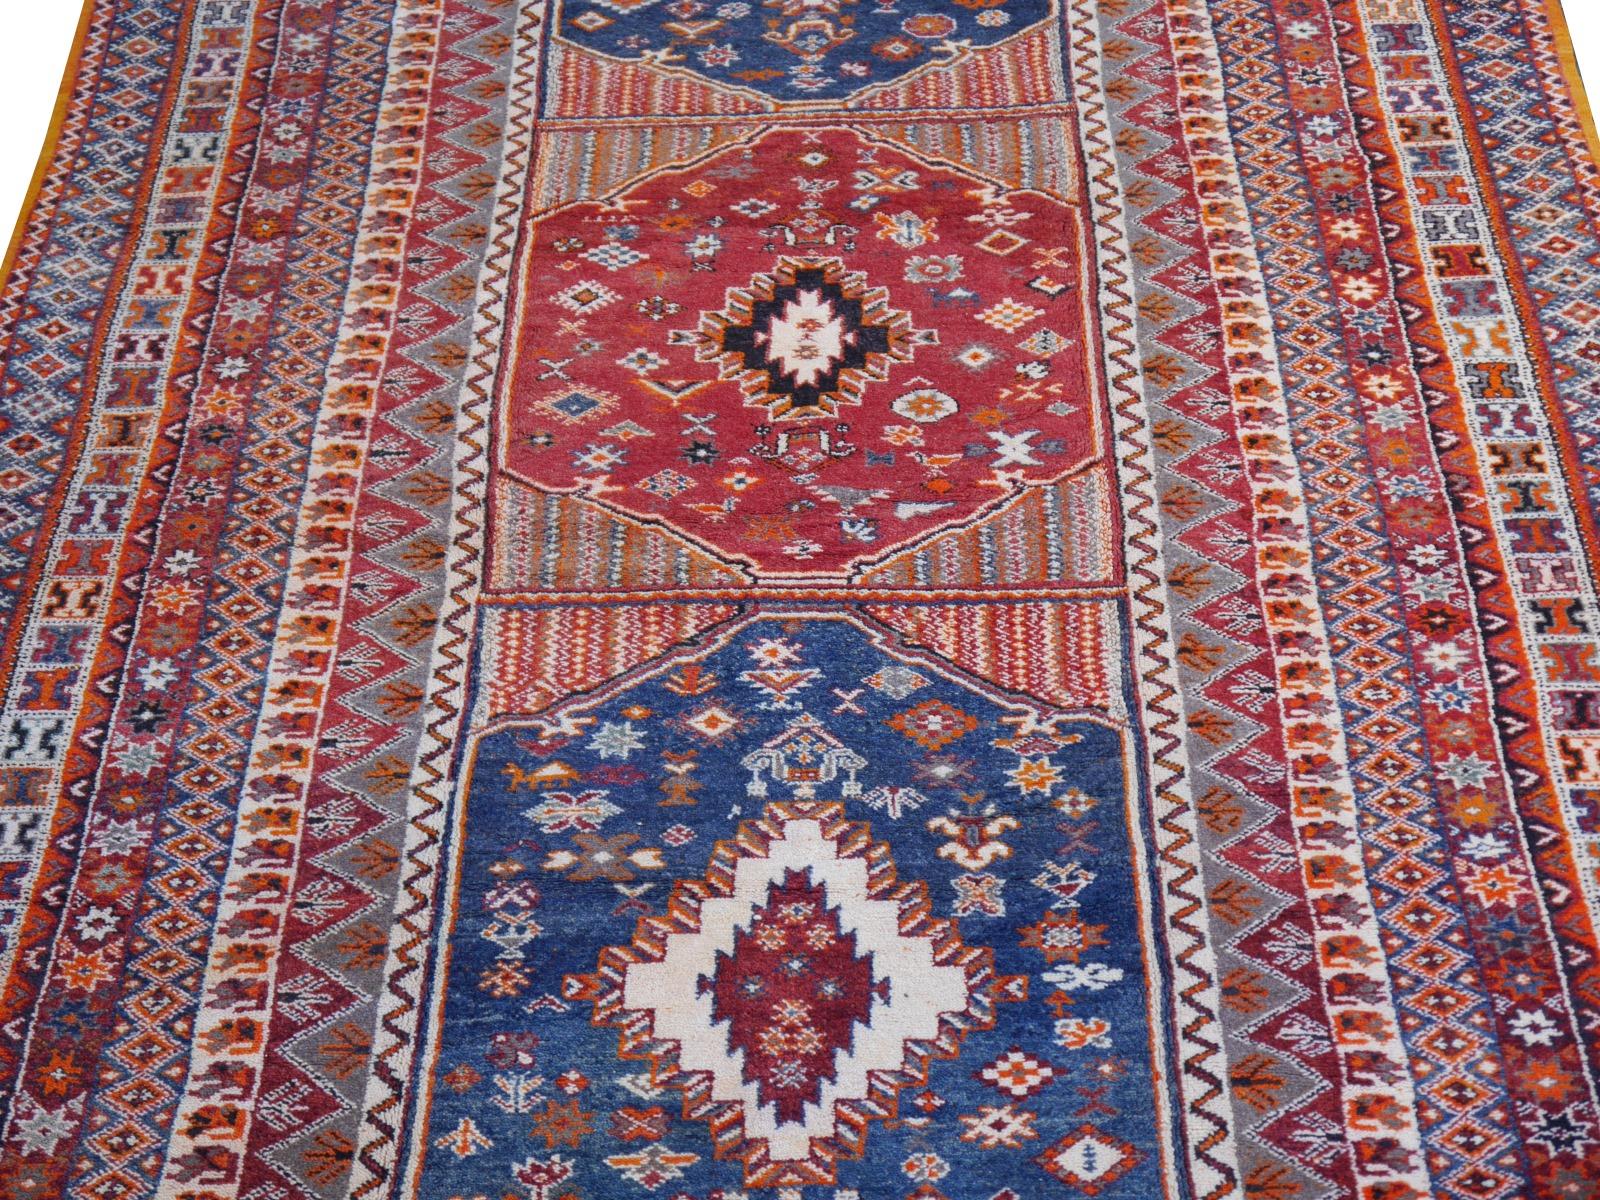 Oversized Moroccan Vintage Rug North African Tribal Design Djoharian Collection  In Excellent Condition For Sale In Lohr, Bavaria, DE